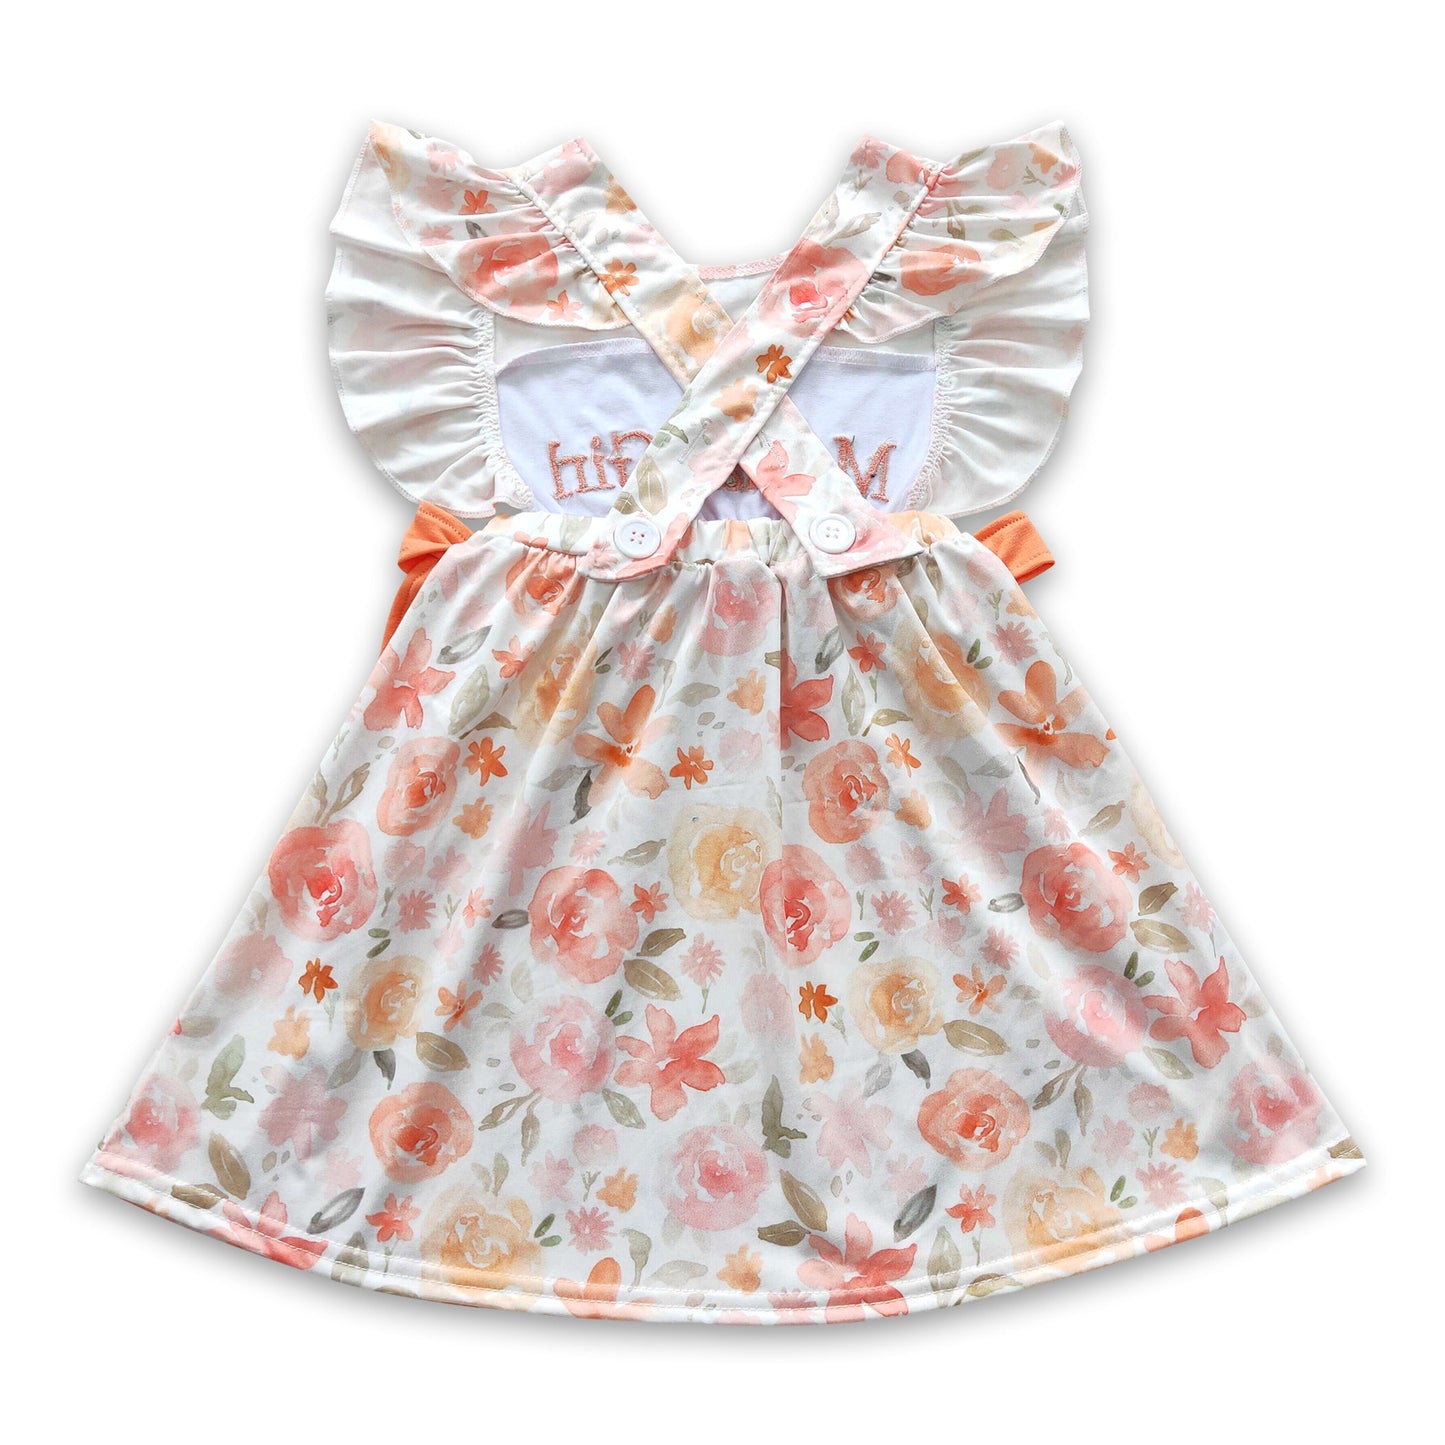 Mama's girl floral mother's day baby girls dress